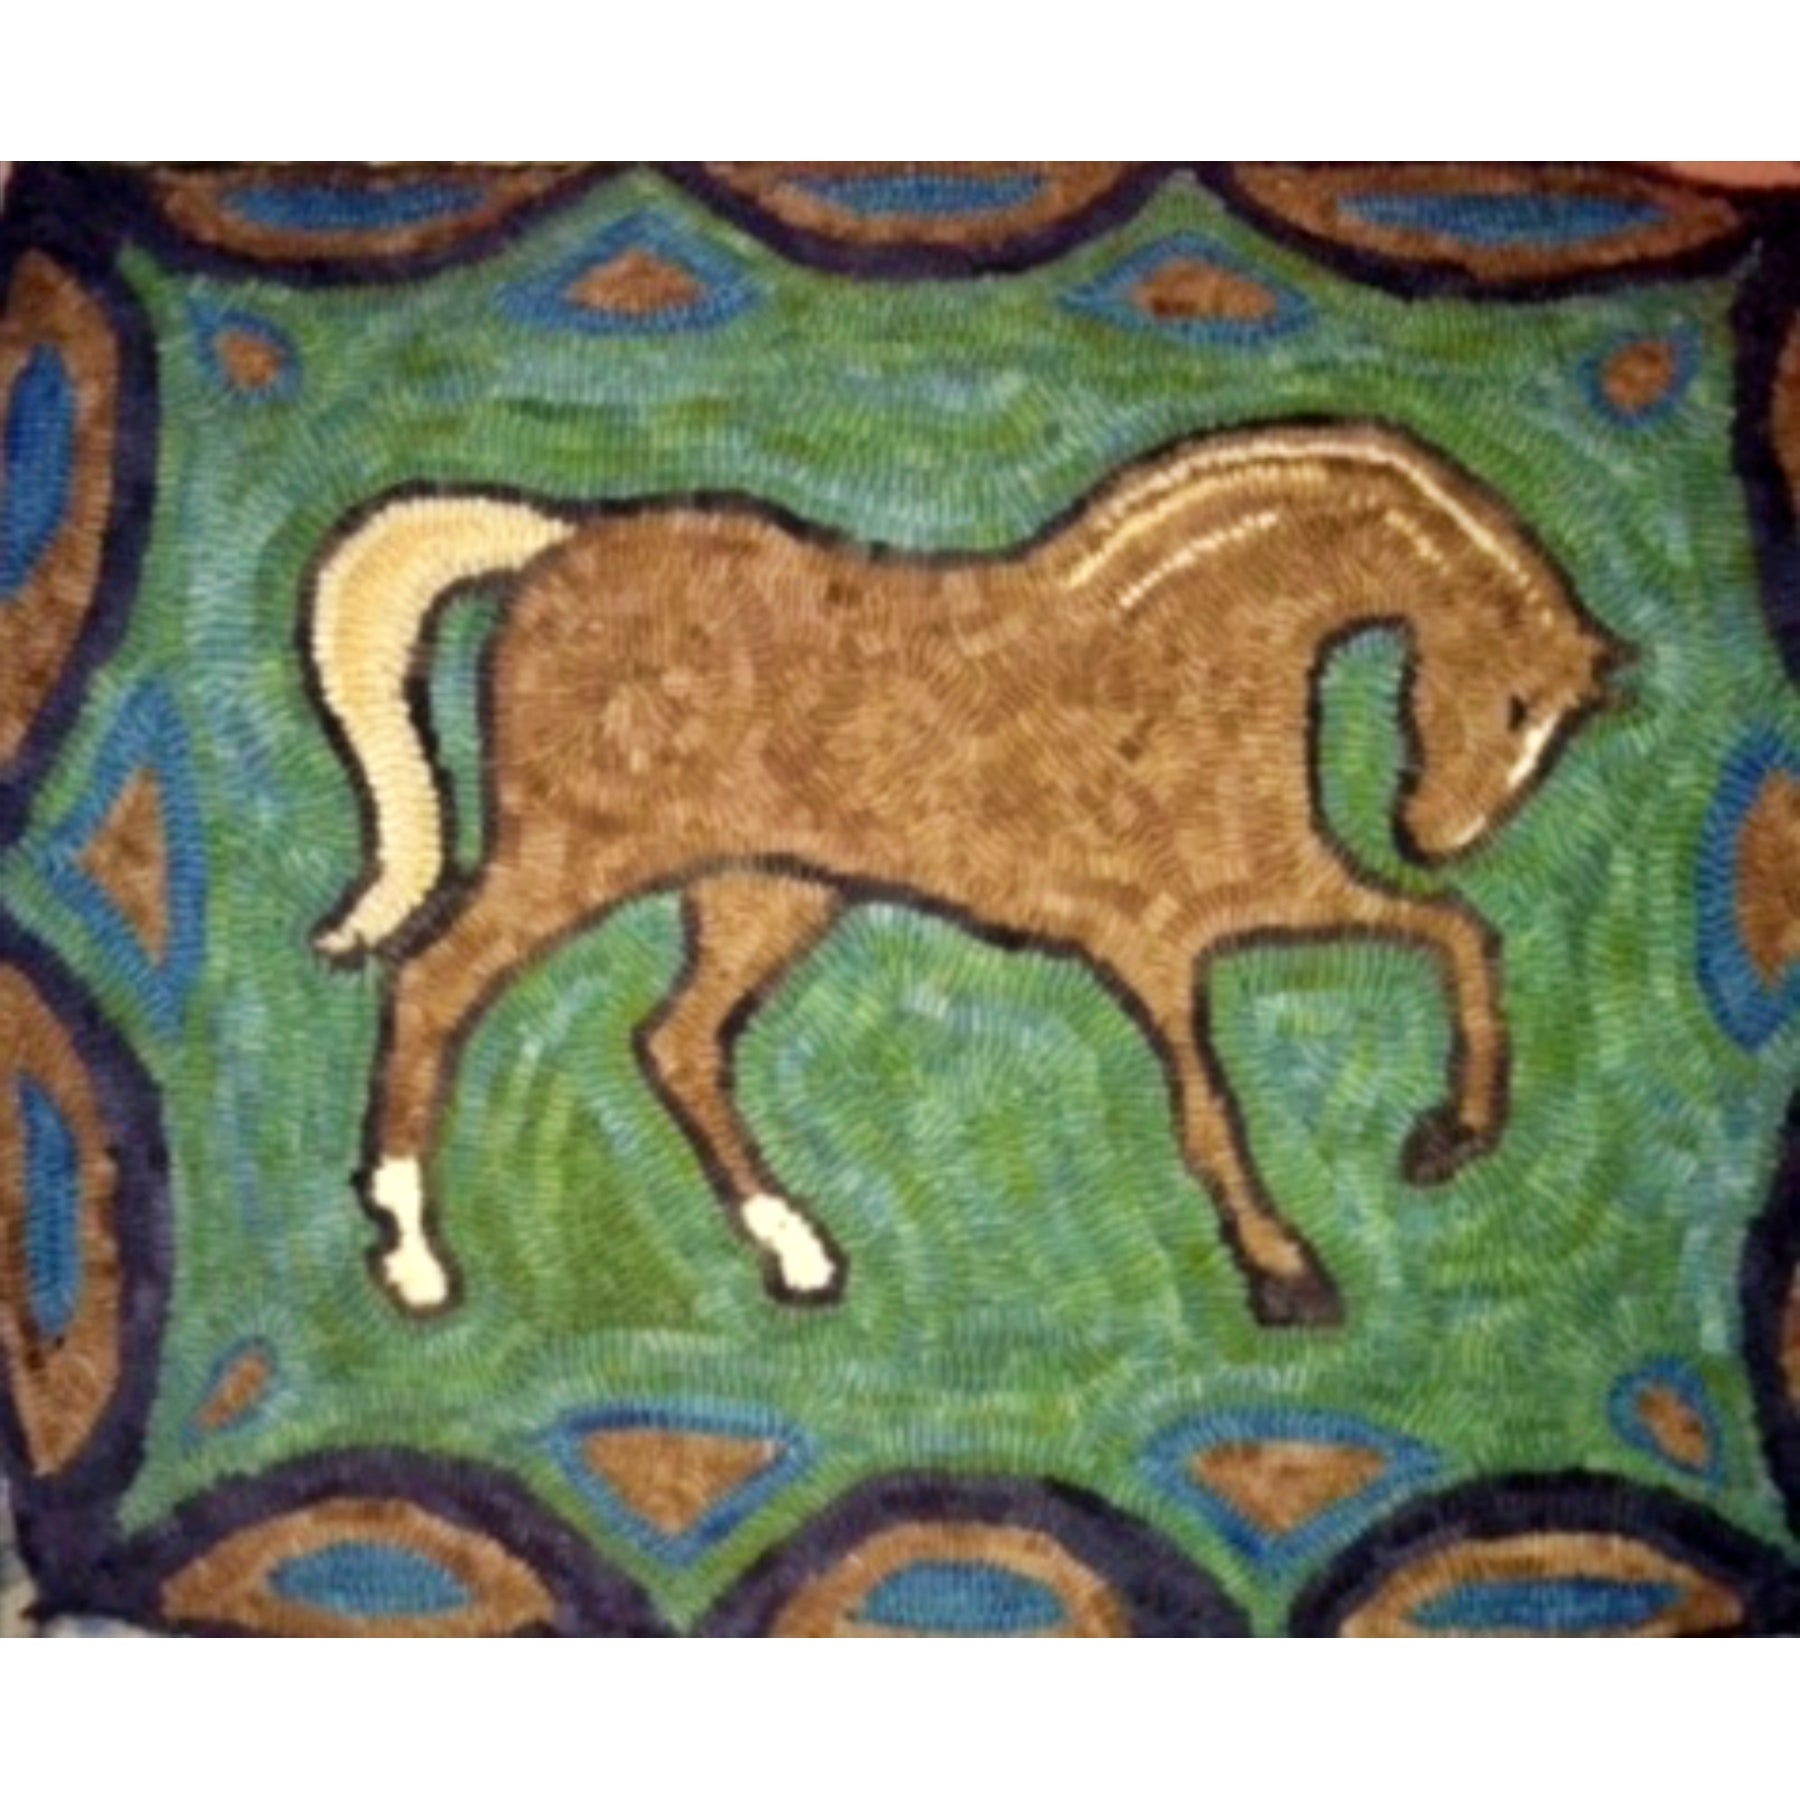 Horse, rug hooked by Marcia Triggs